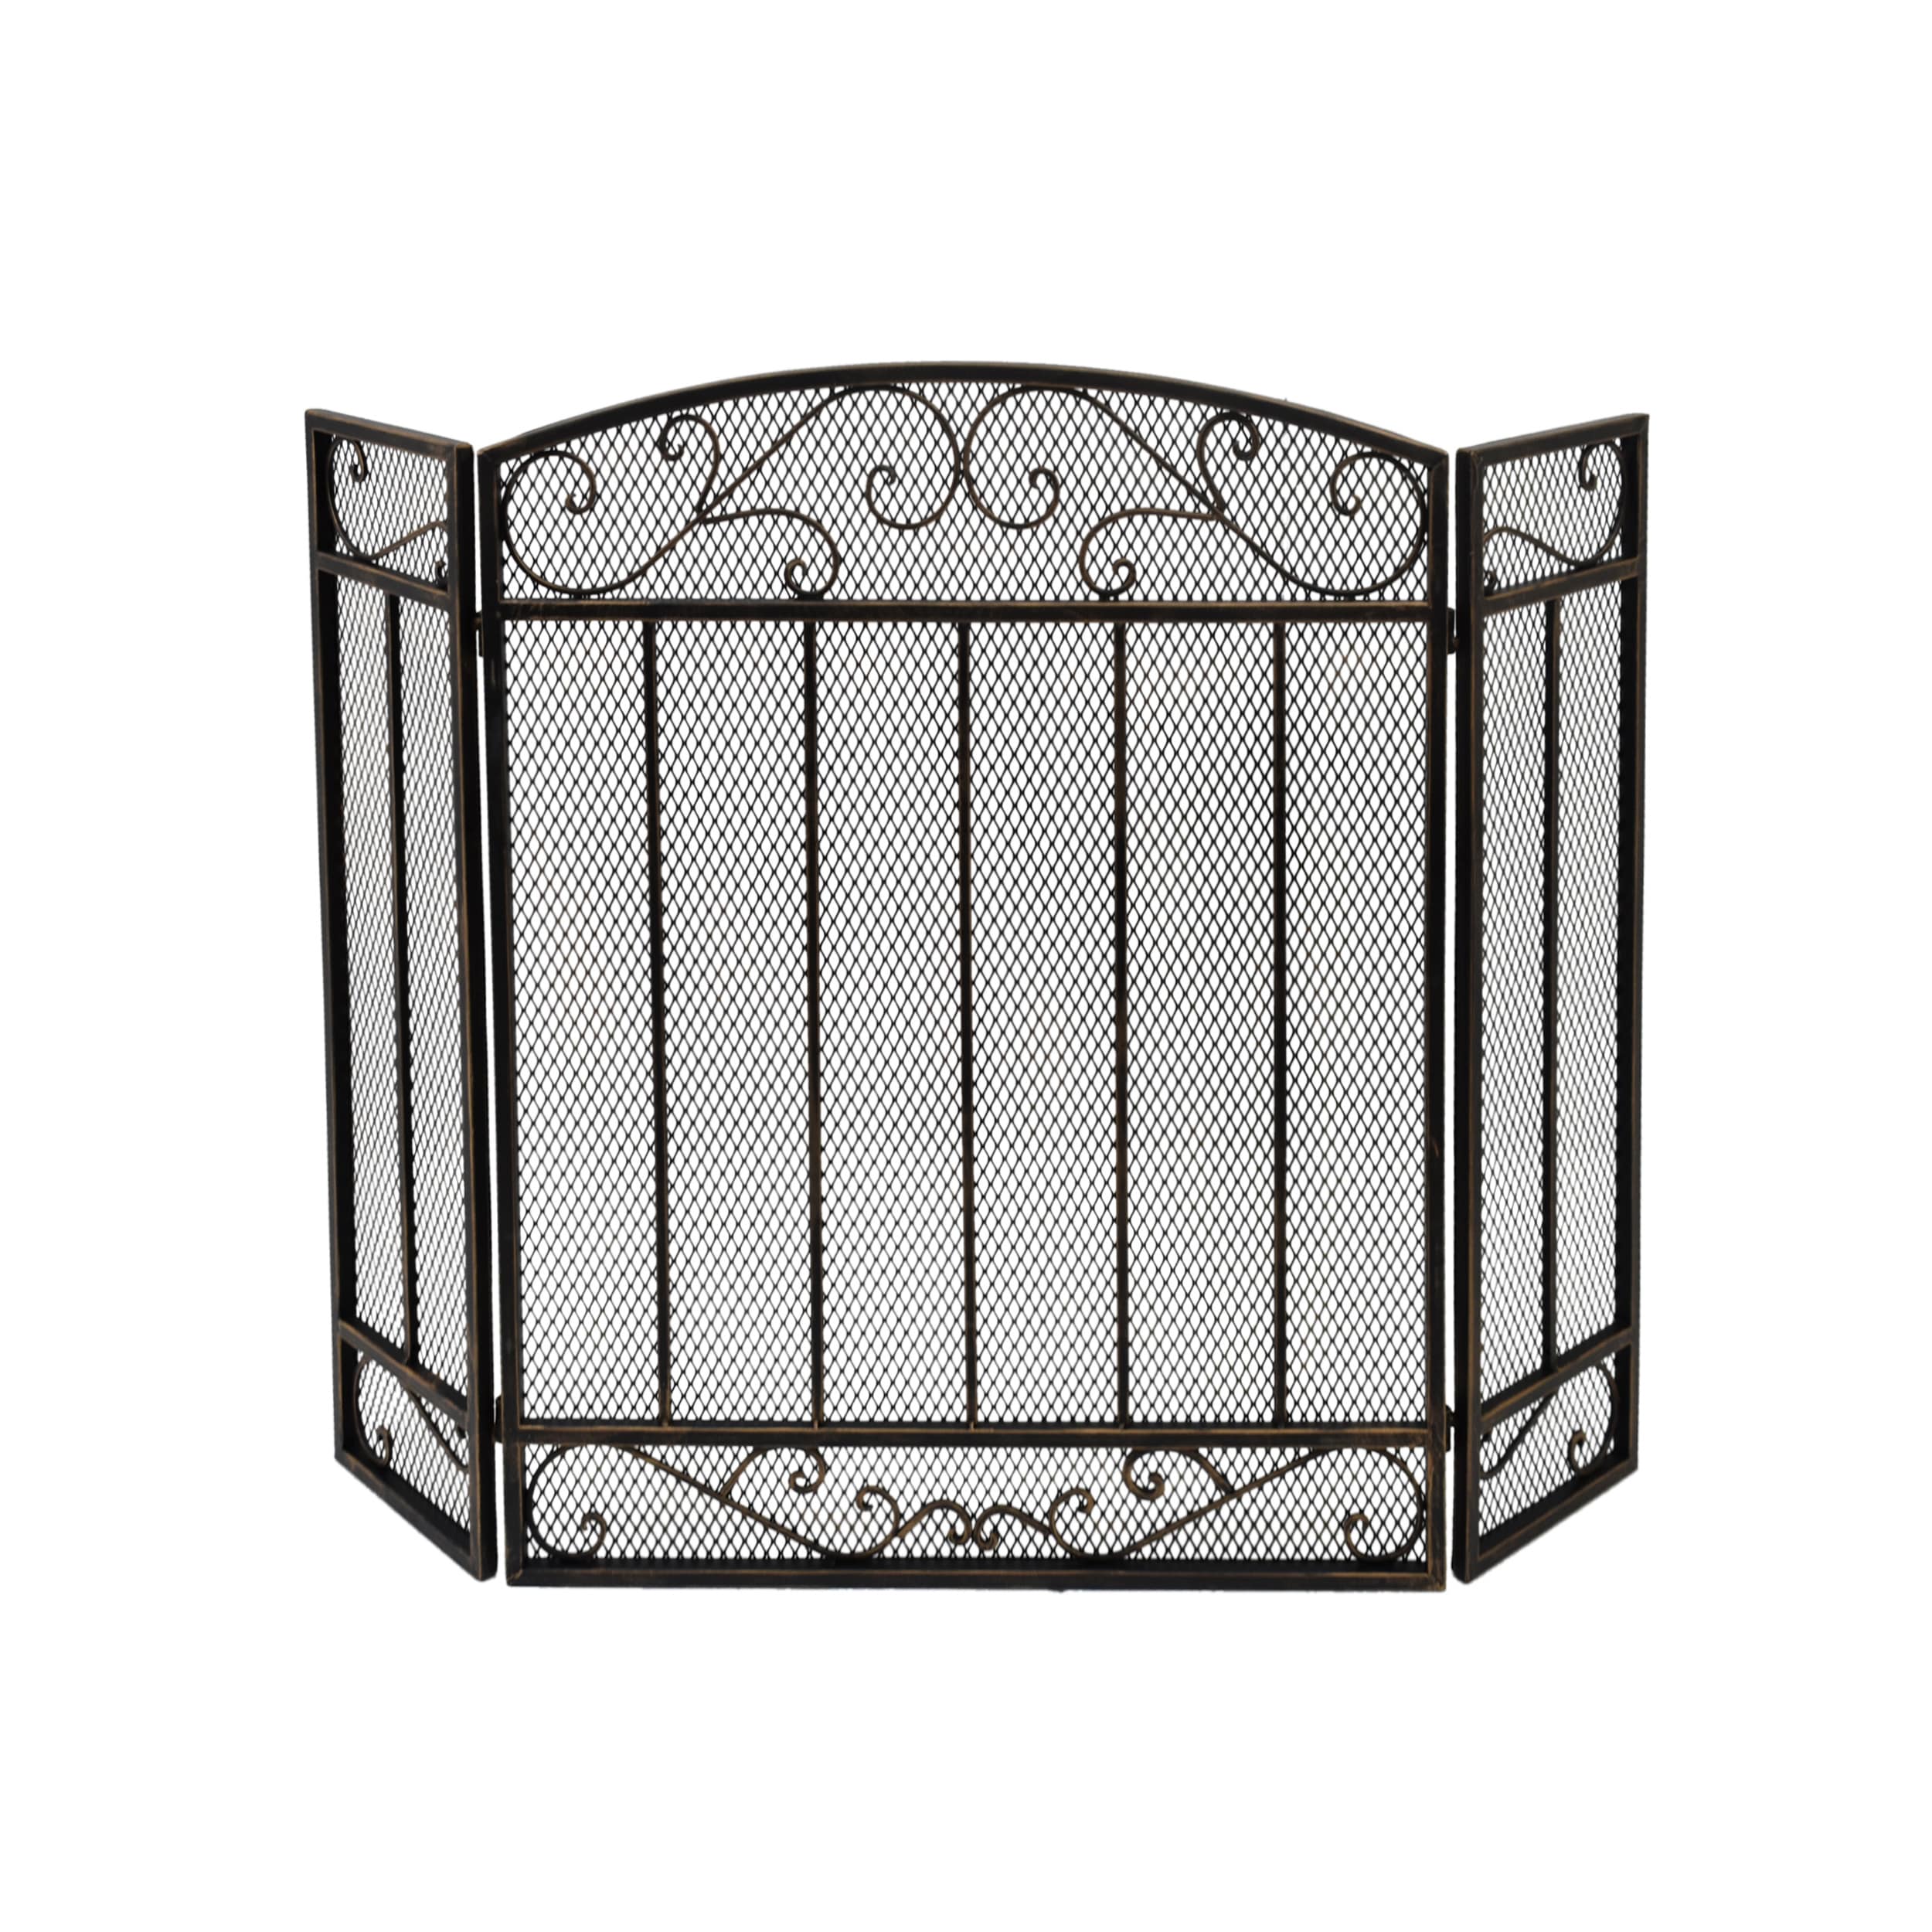 Cheswold Contemporary Three Panel Iron Firescreen, Black Gold Finish | - Best Selling Home Decor 309108